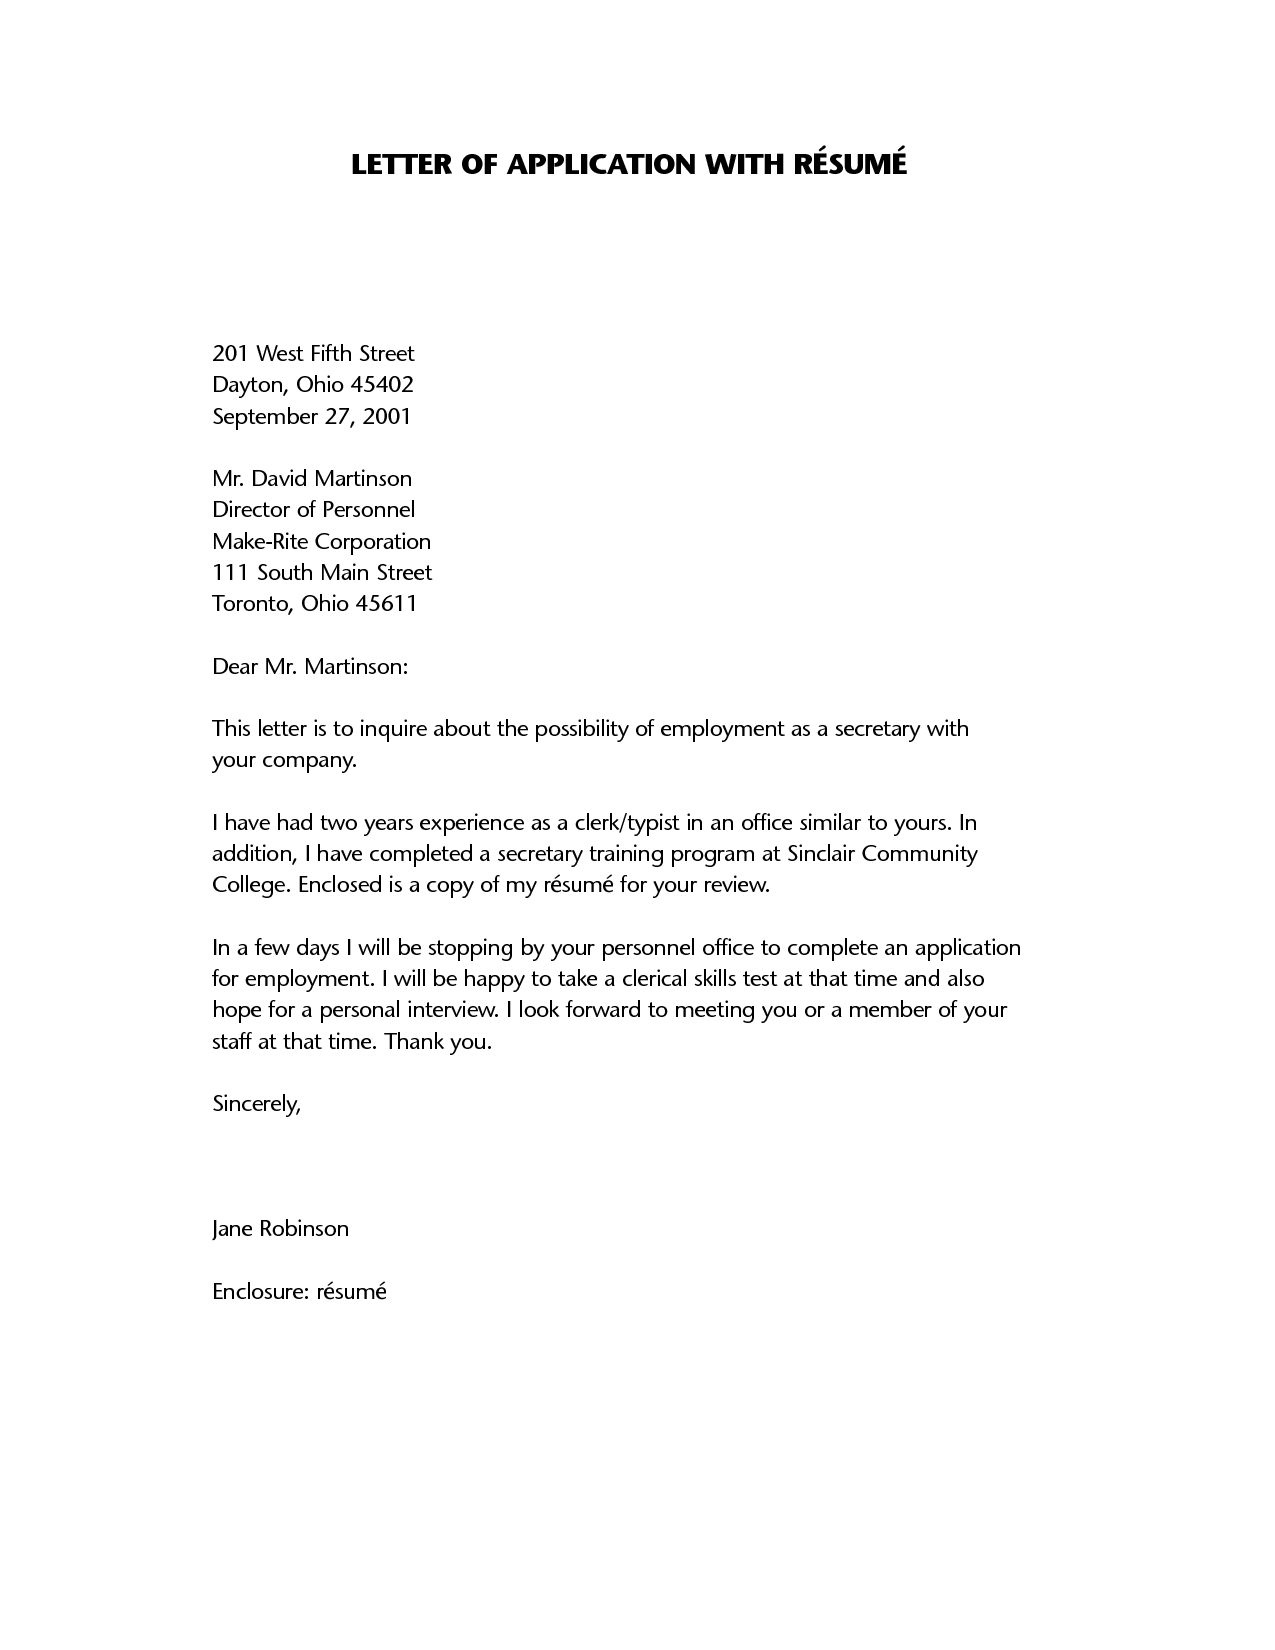 resume application letter a letter of application is a document